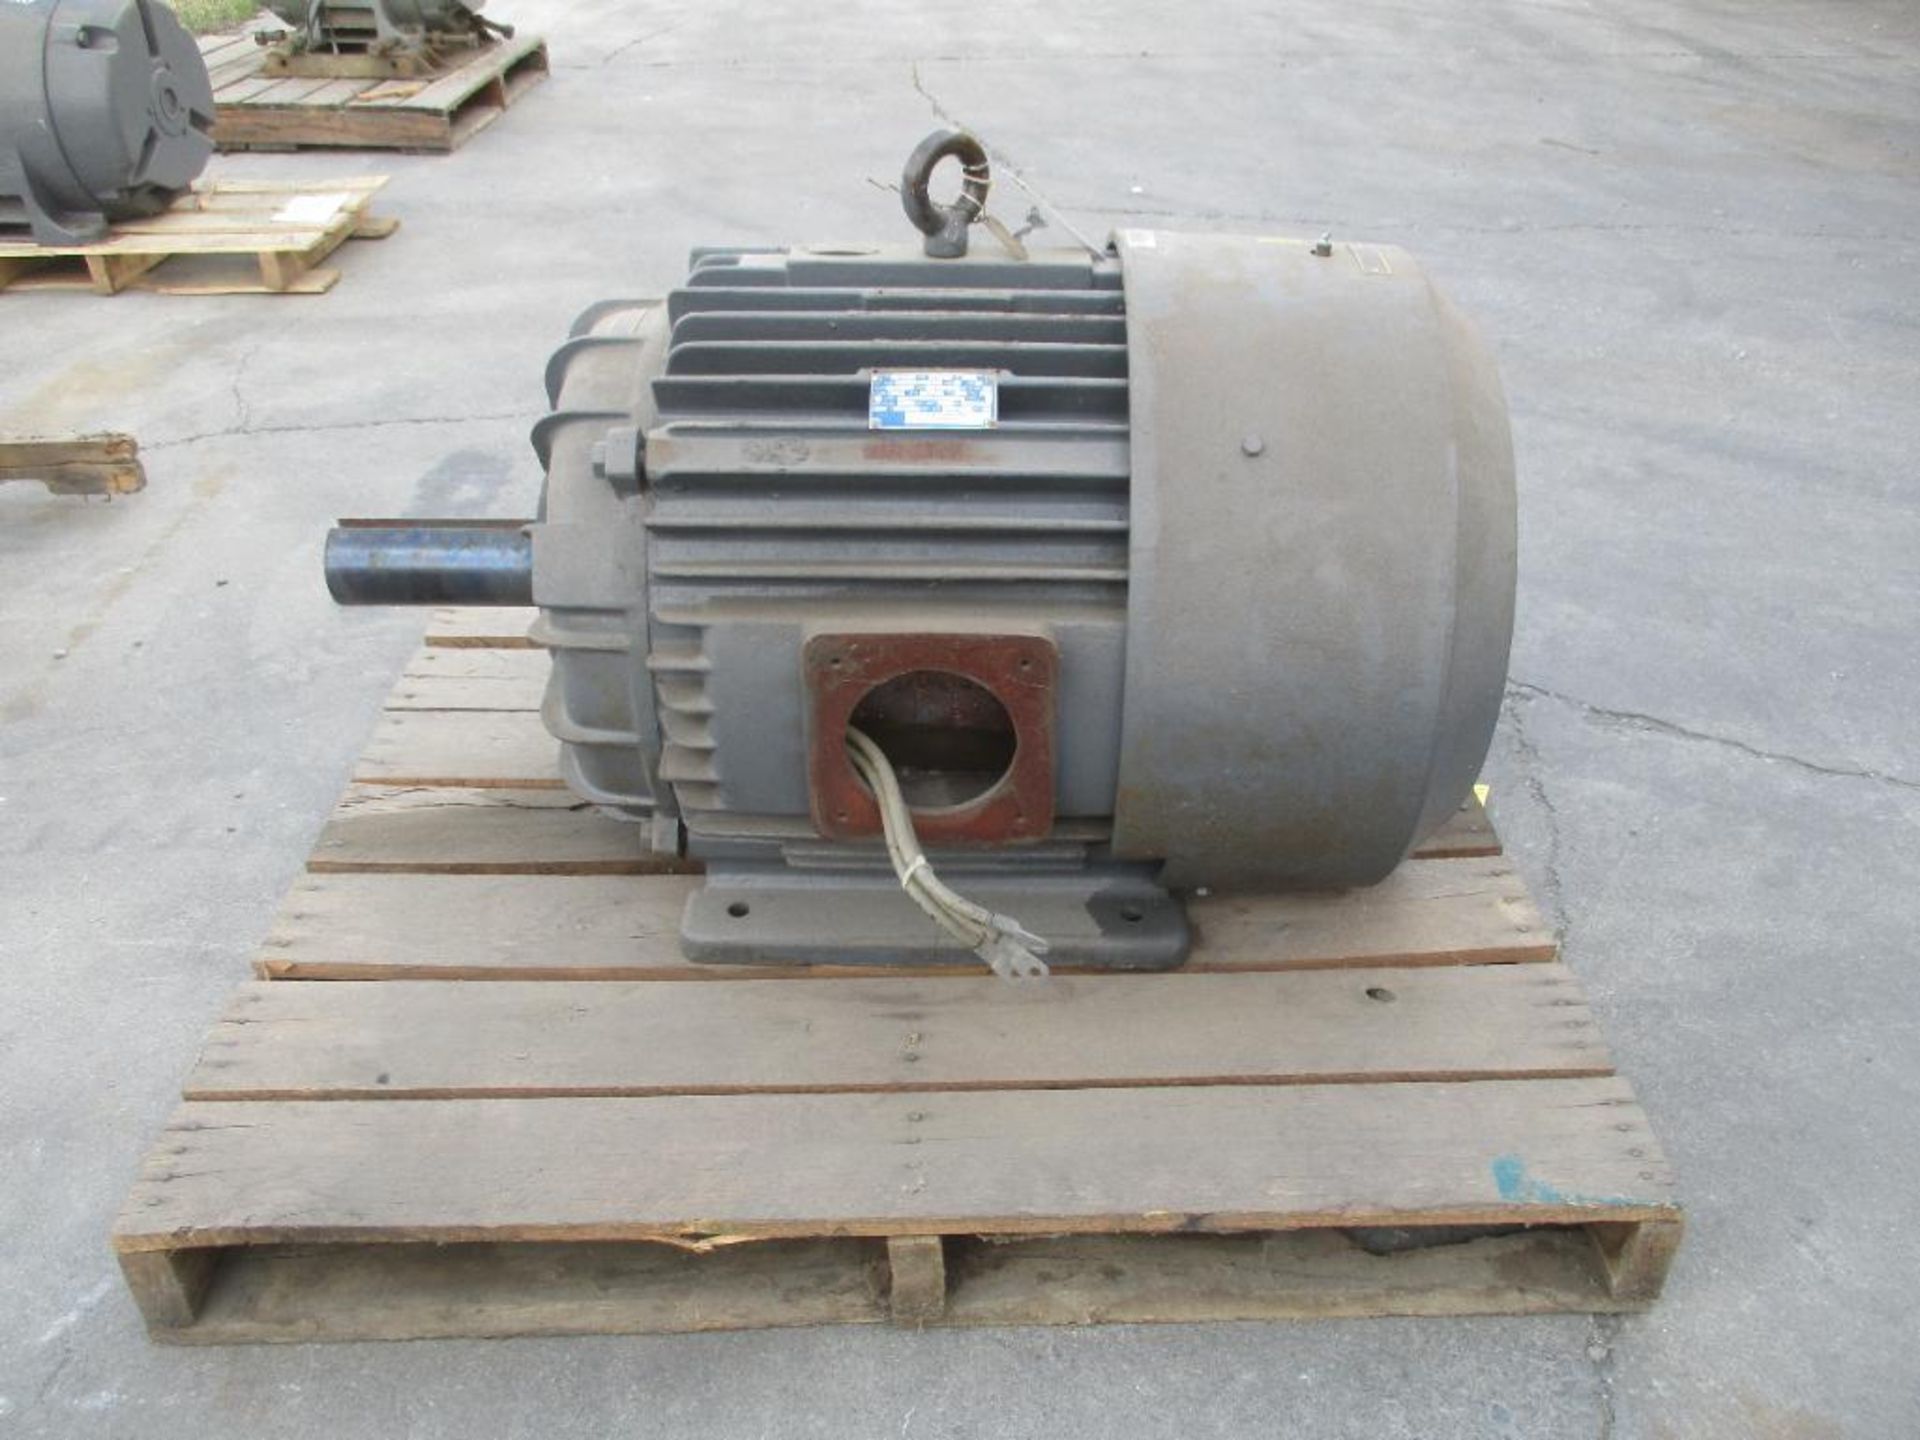 MAGNETEK 3 PHASE 125HP 1780RPM 444T FRAME A/C MOTOR P/N N/A 1754# LBS (THIS LOT IS FOB KNOXVILLE TN)